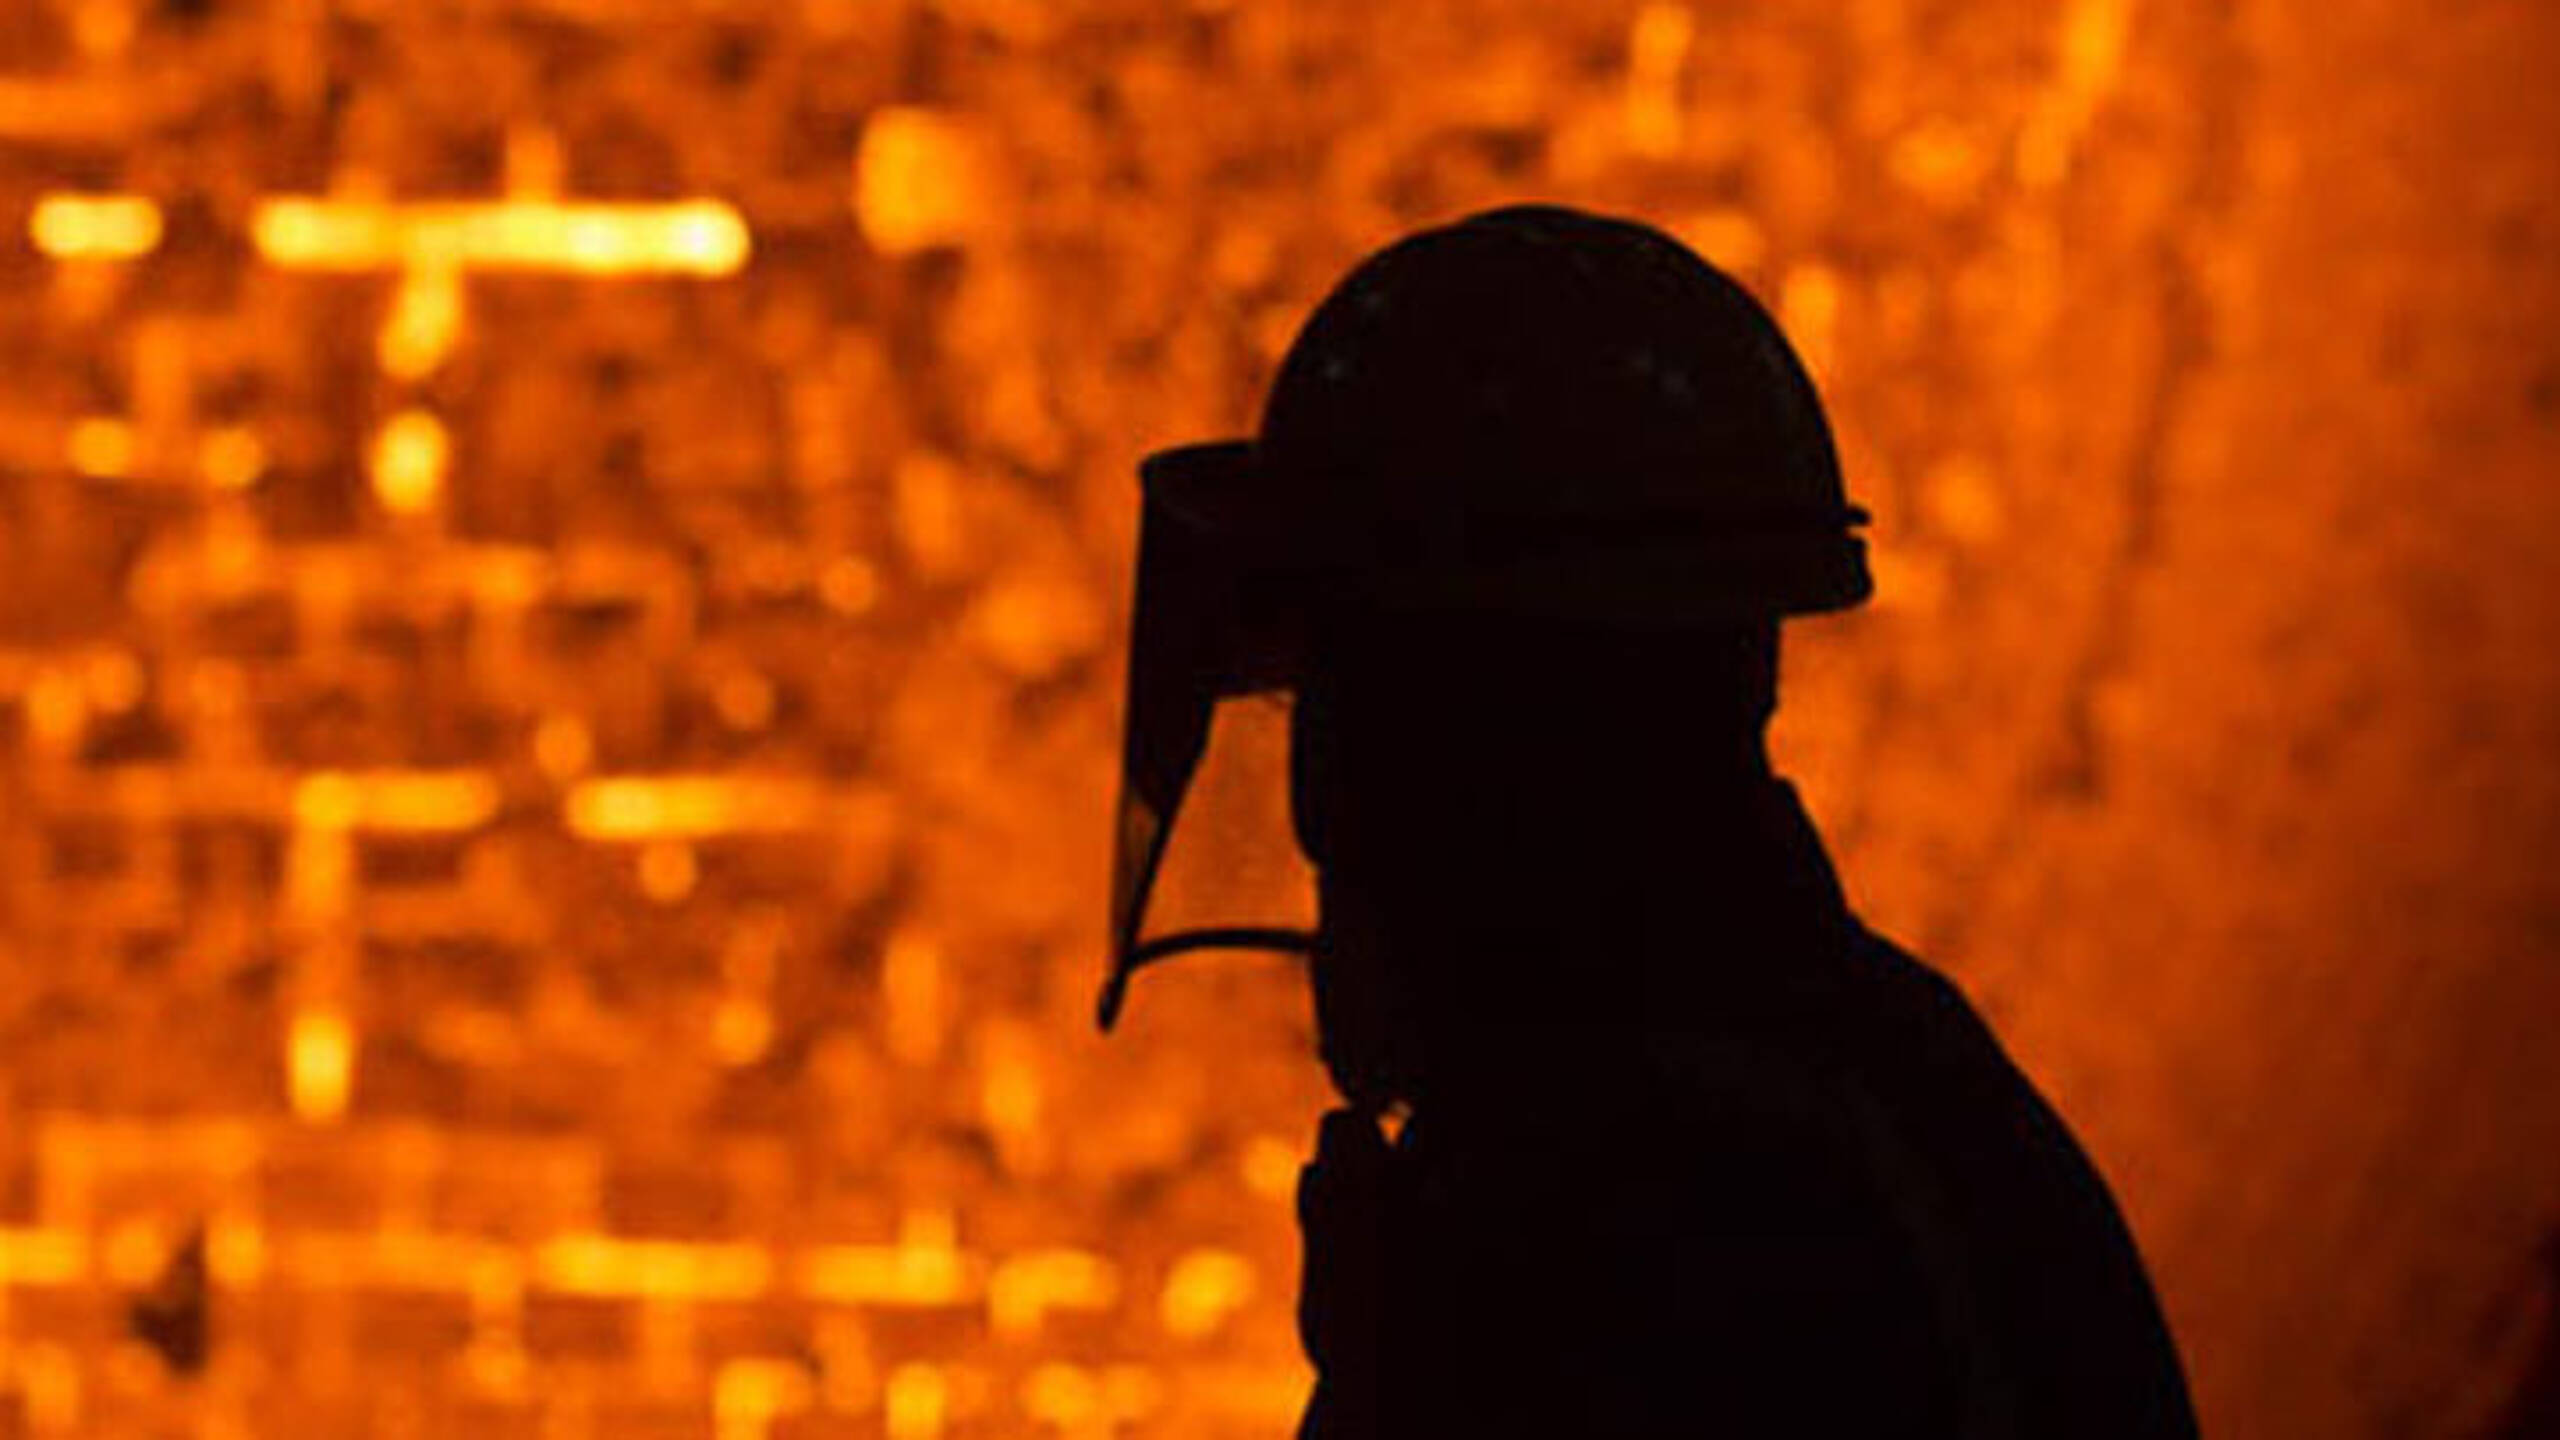 Job loss fears as British Steel accelerates low-carbon transition plan